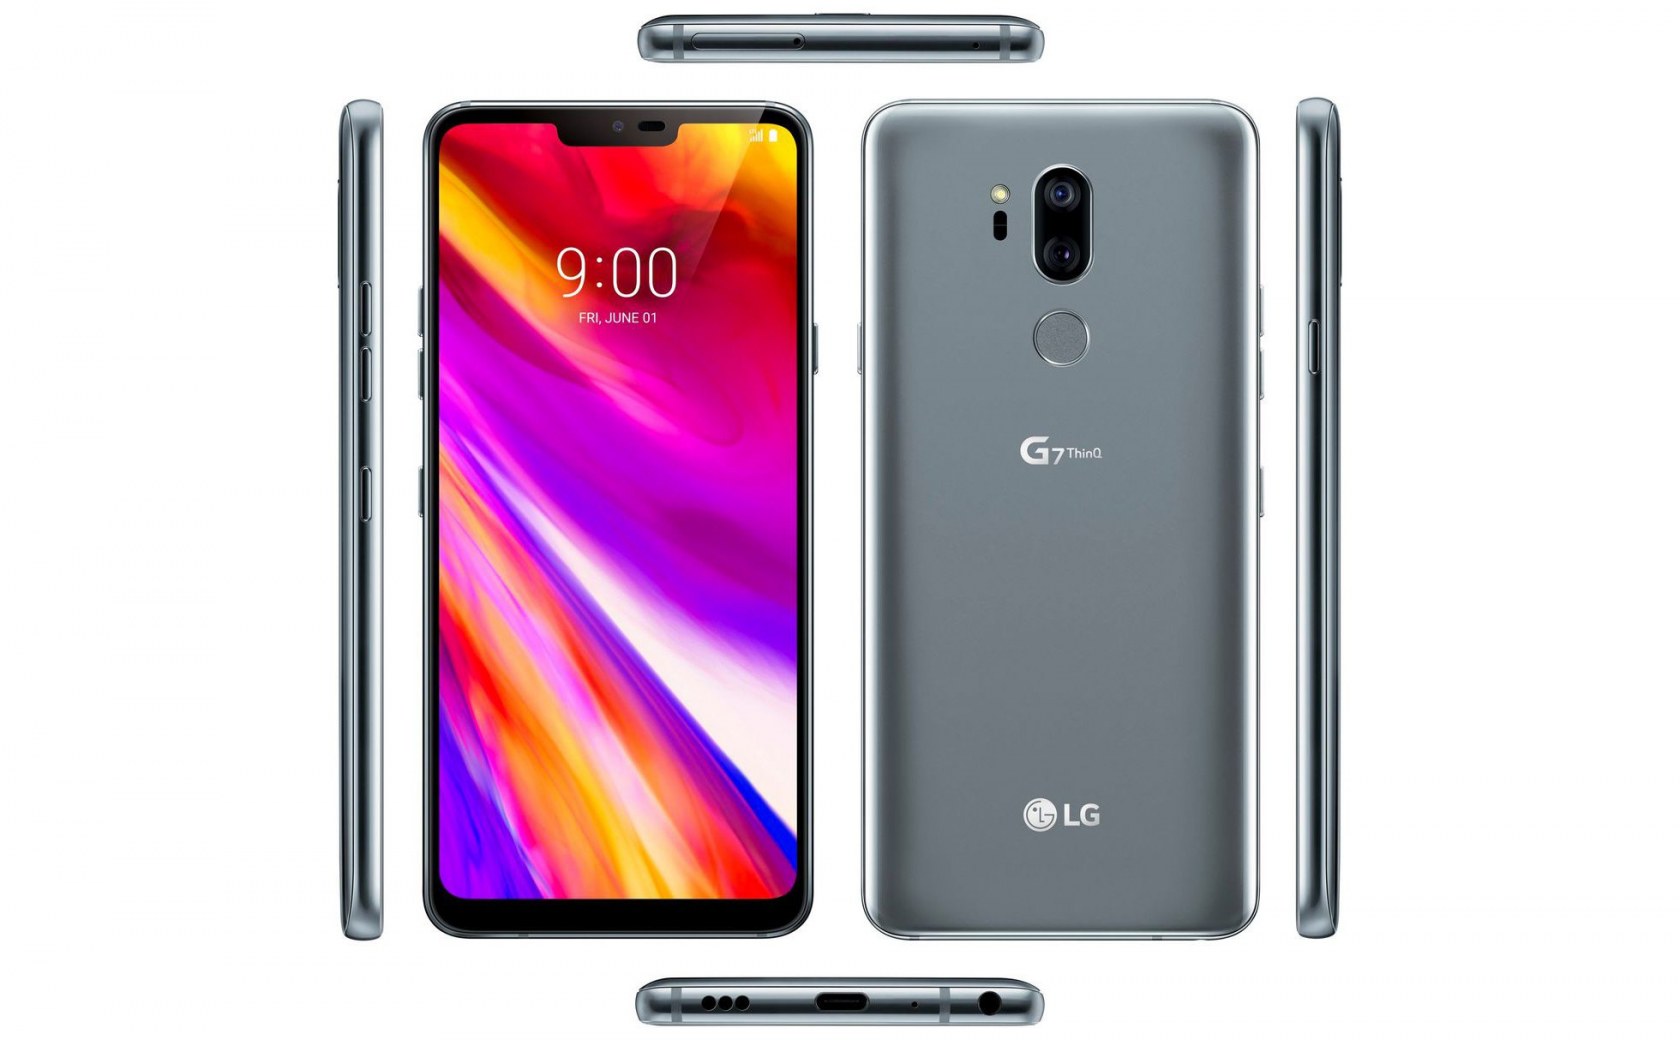 New LG G7 ThinQ leak shows branding, notch, and dedicated Google Assistant button